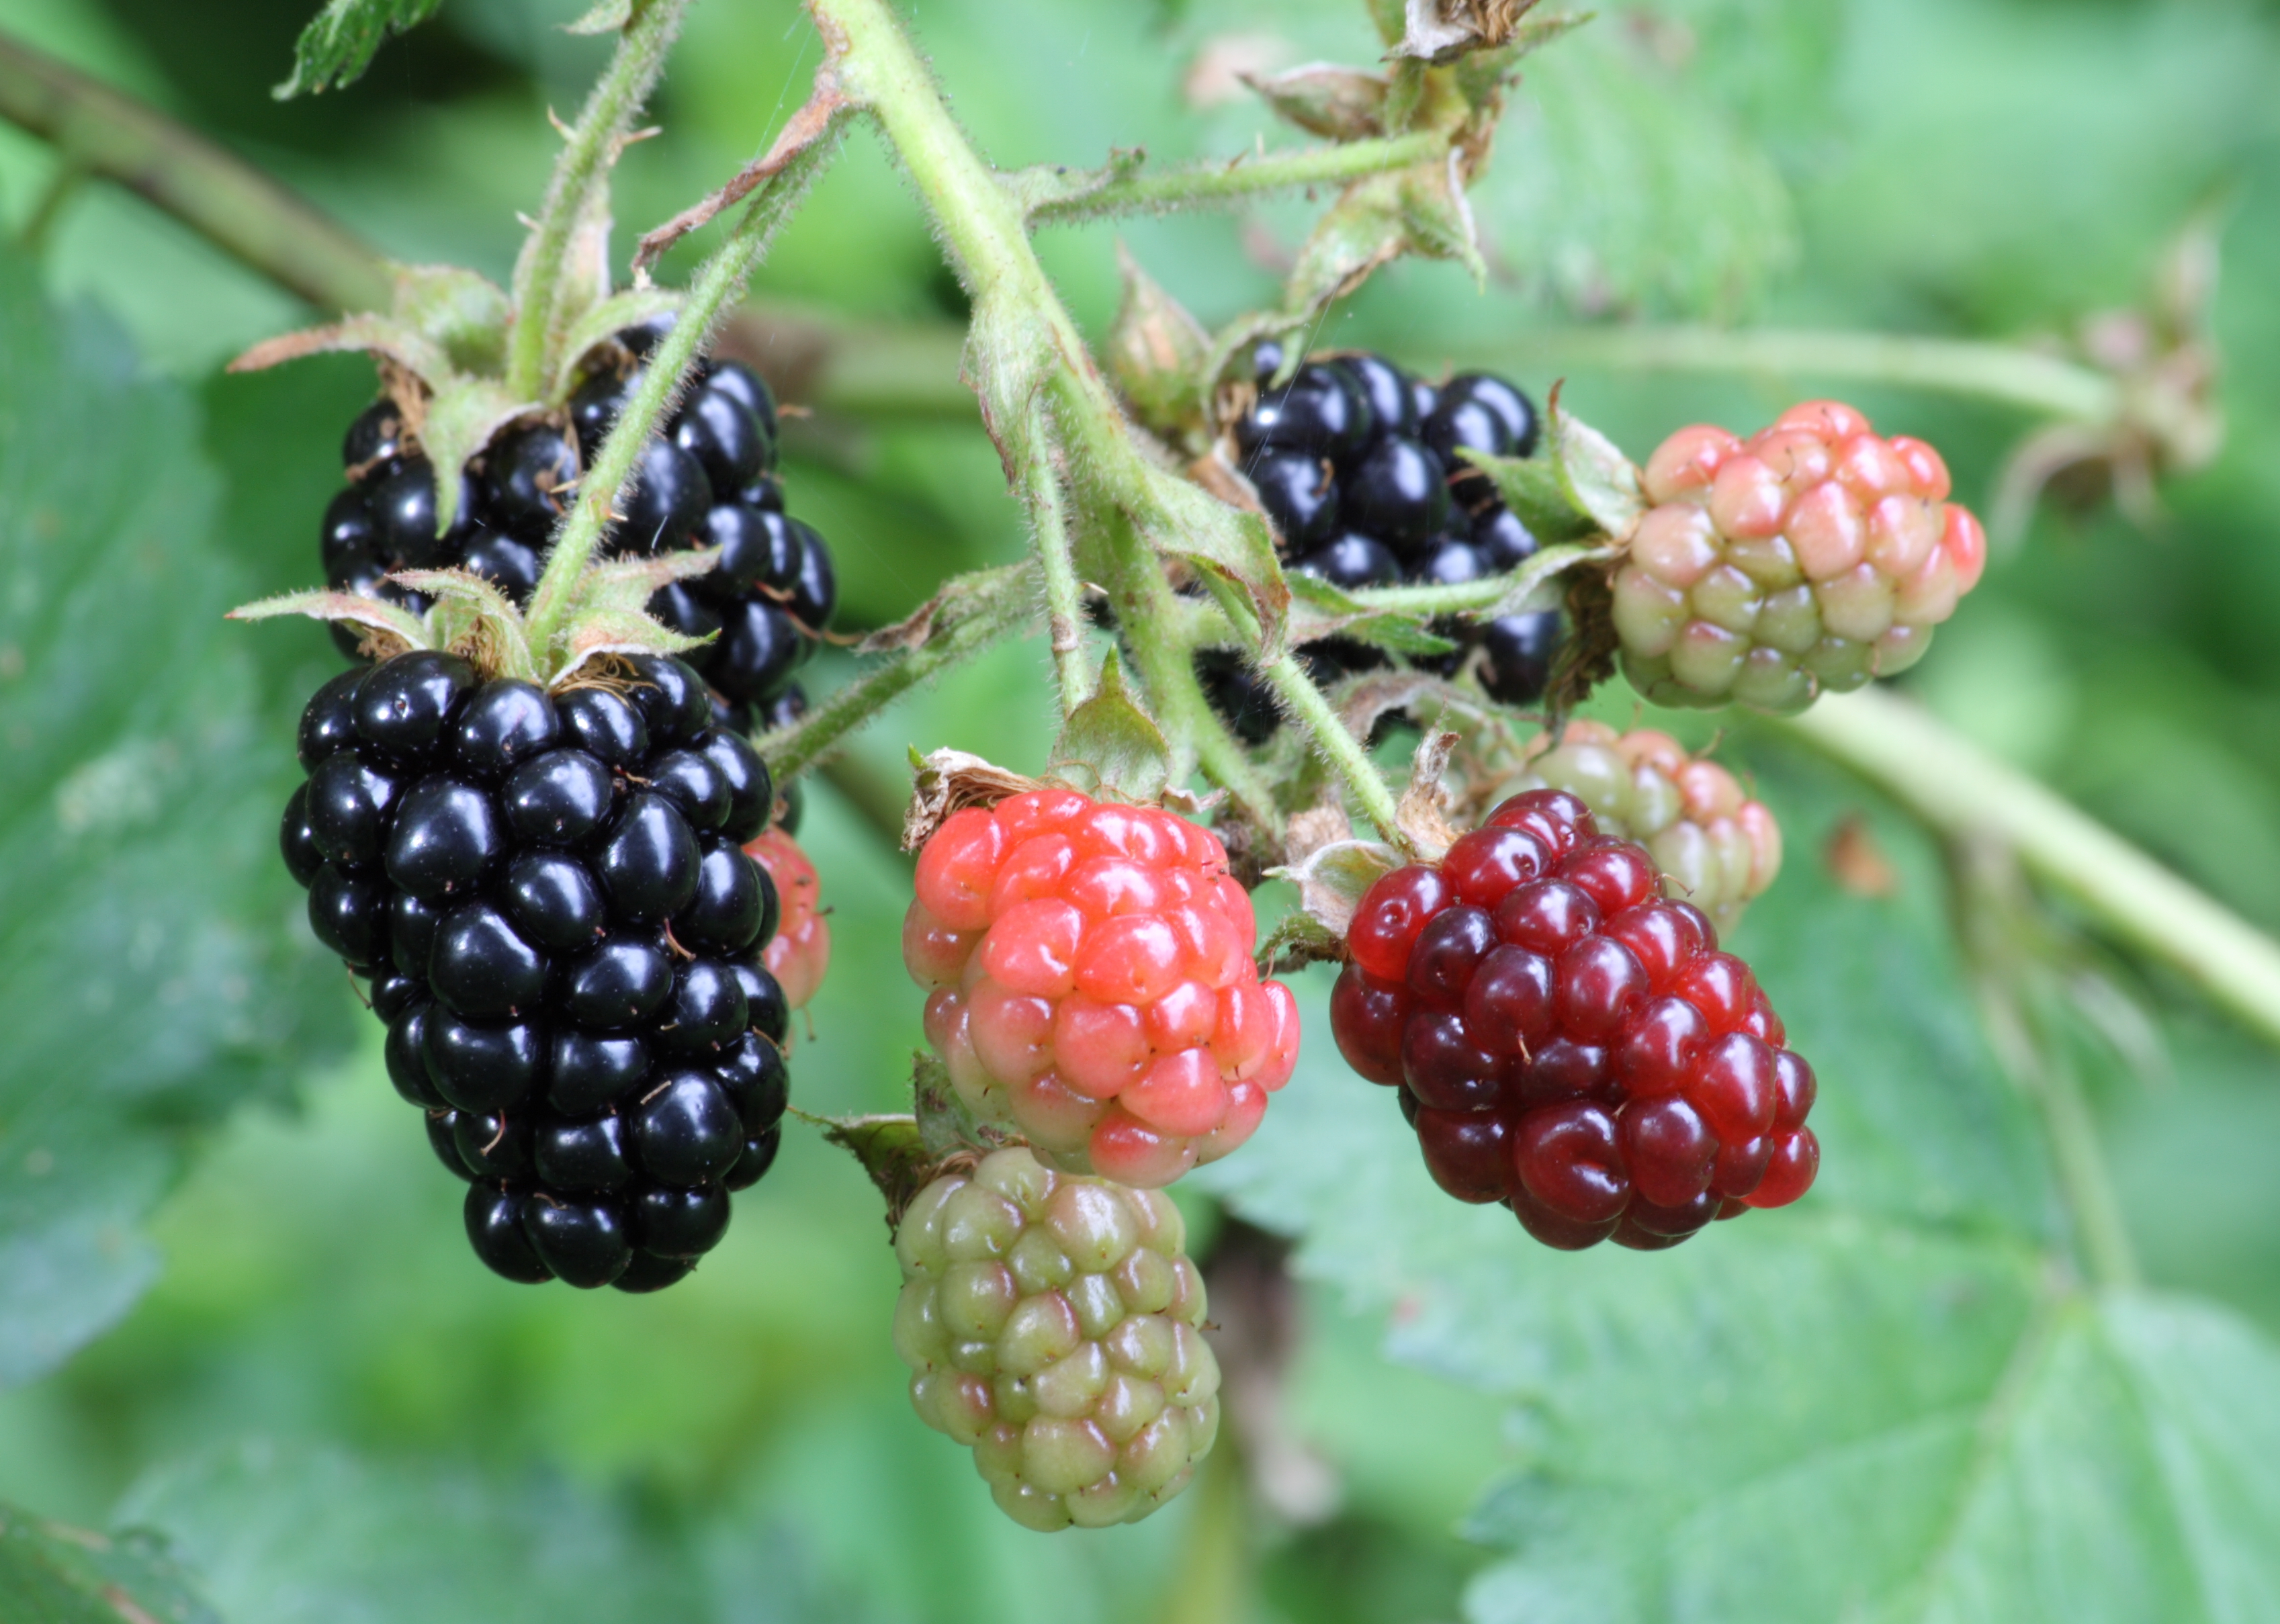 Blackberries in a range of ripeness, in West Hartford, Connecticut.